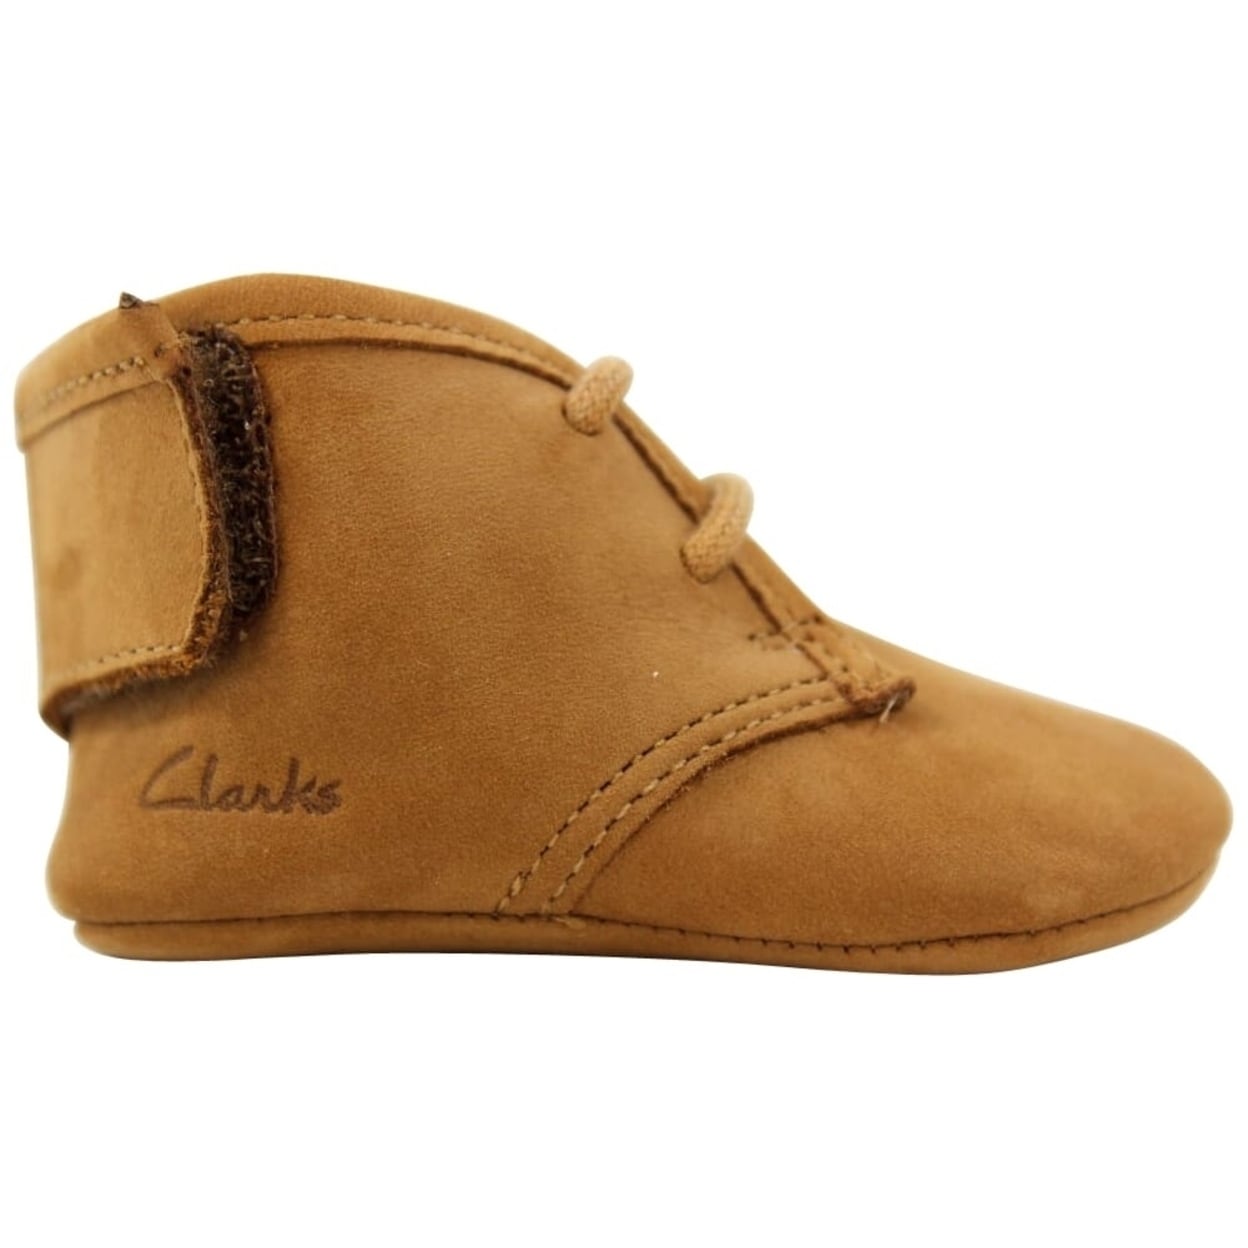 clarks baby shoes